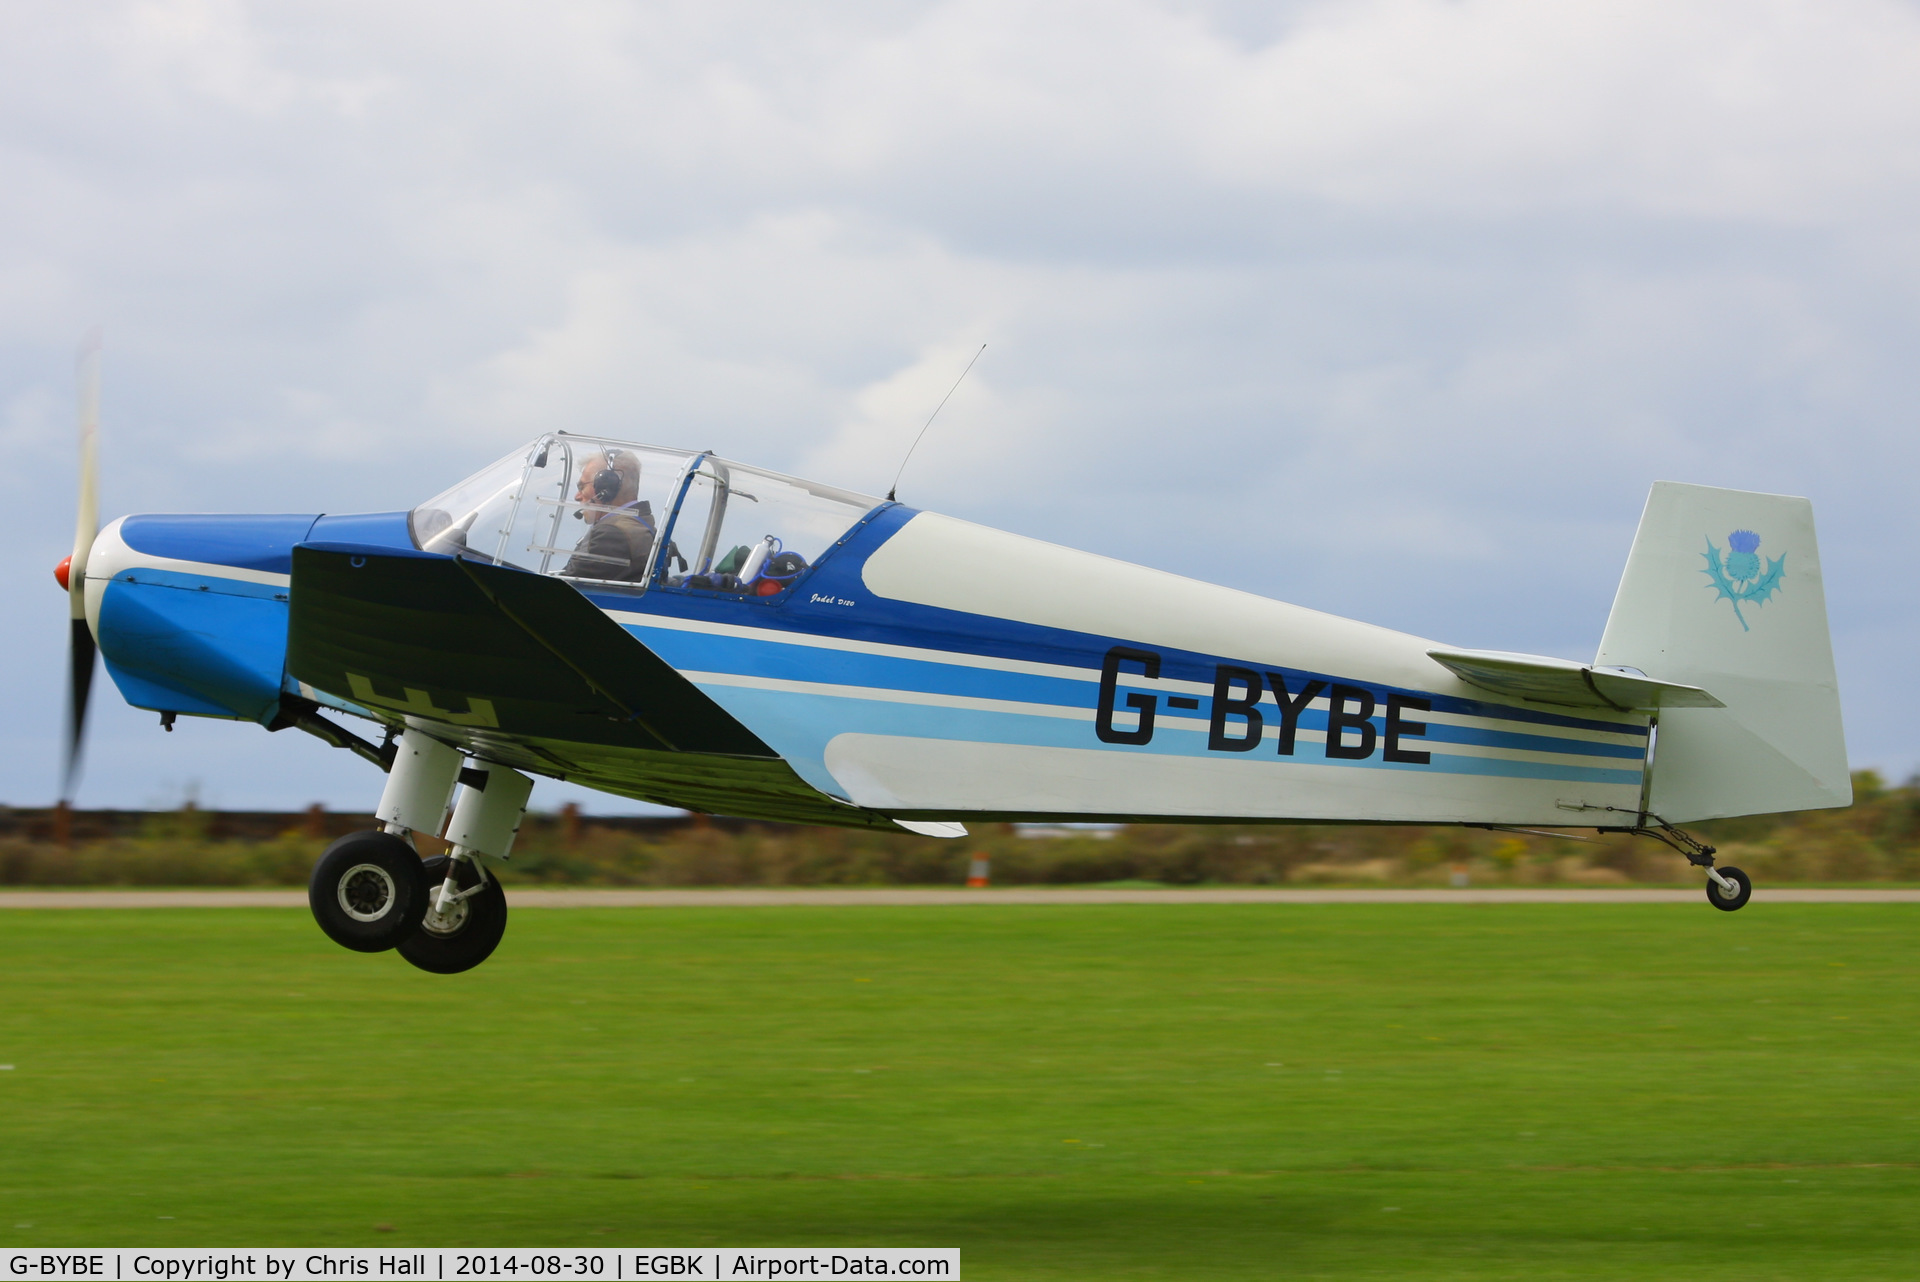 G-BYBE, 1964 Jodel (Wassmer) D-120A Paris-Nice C/N 269, at the LAA Rally 2014, Sywell